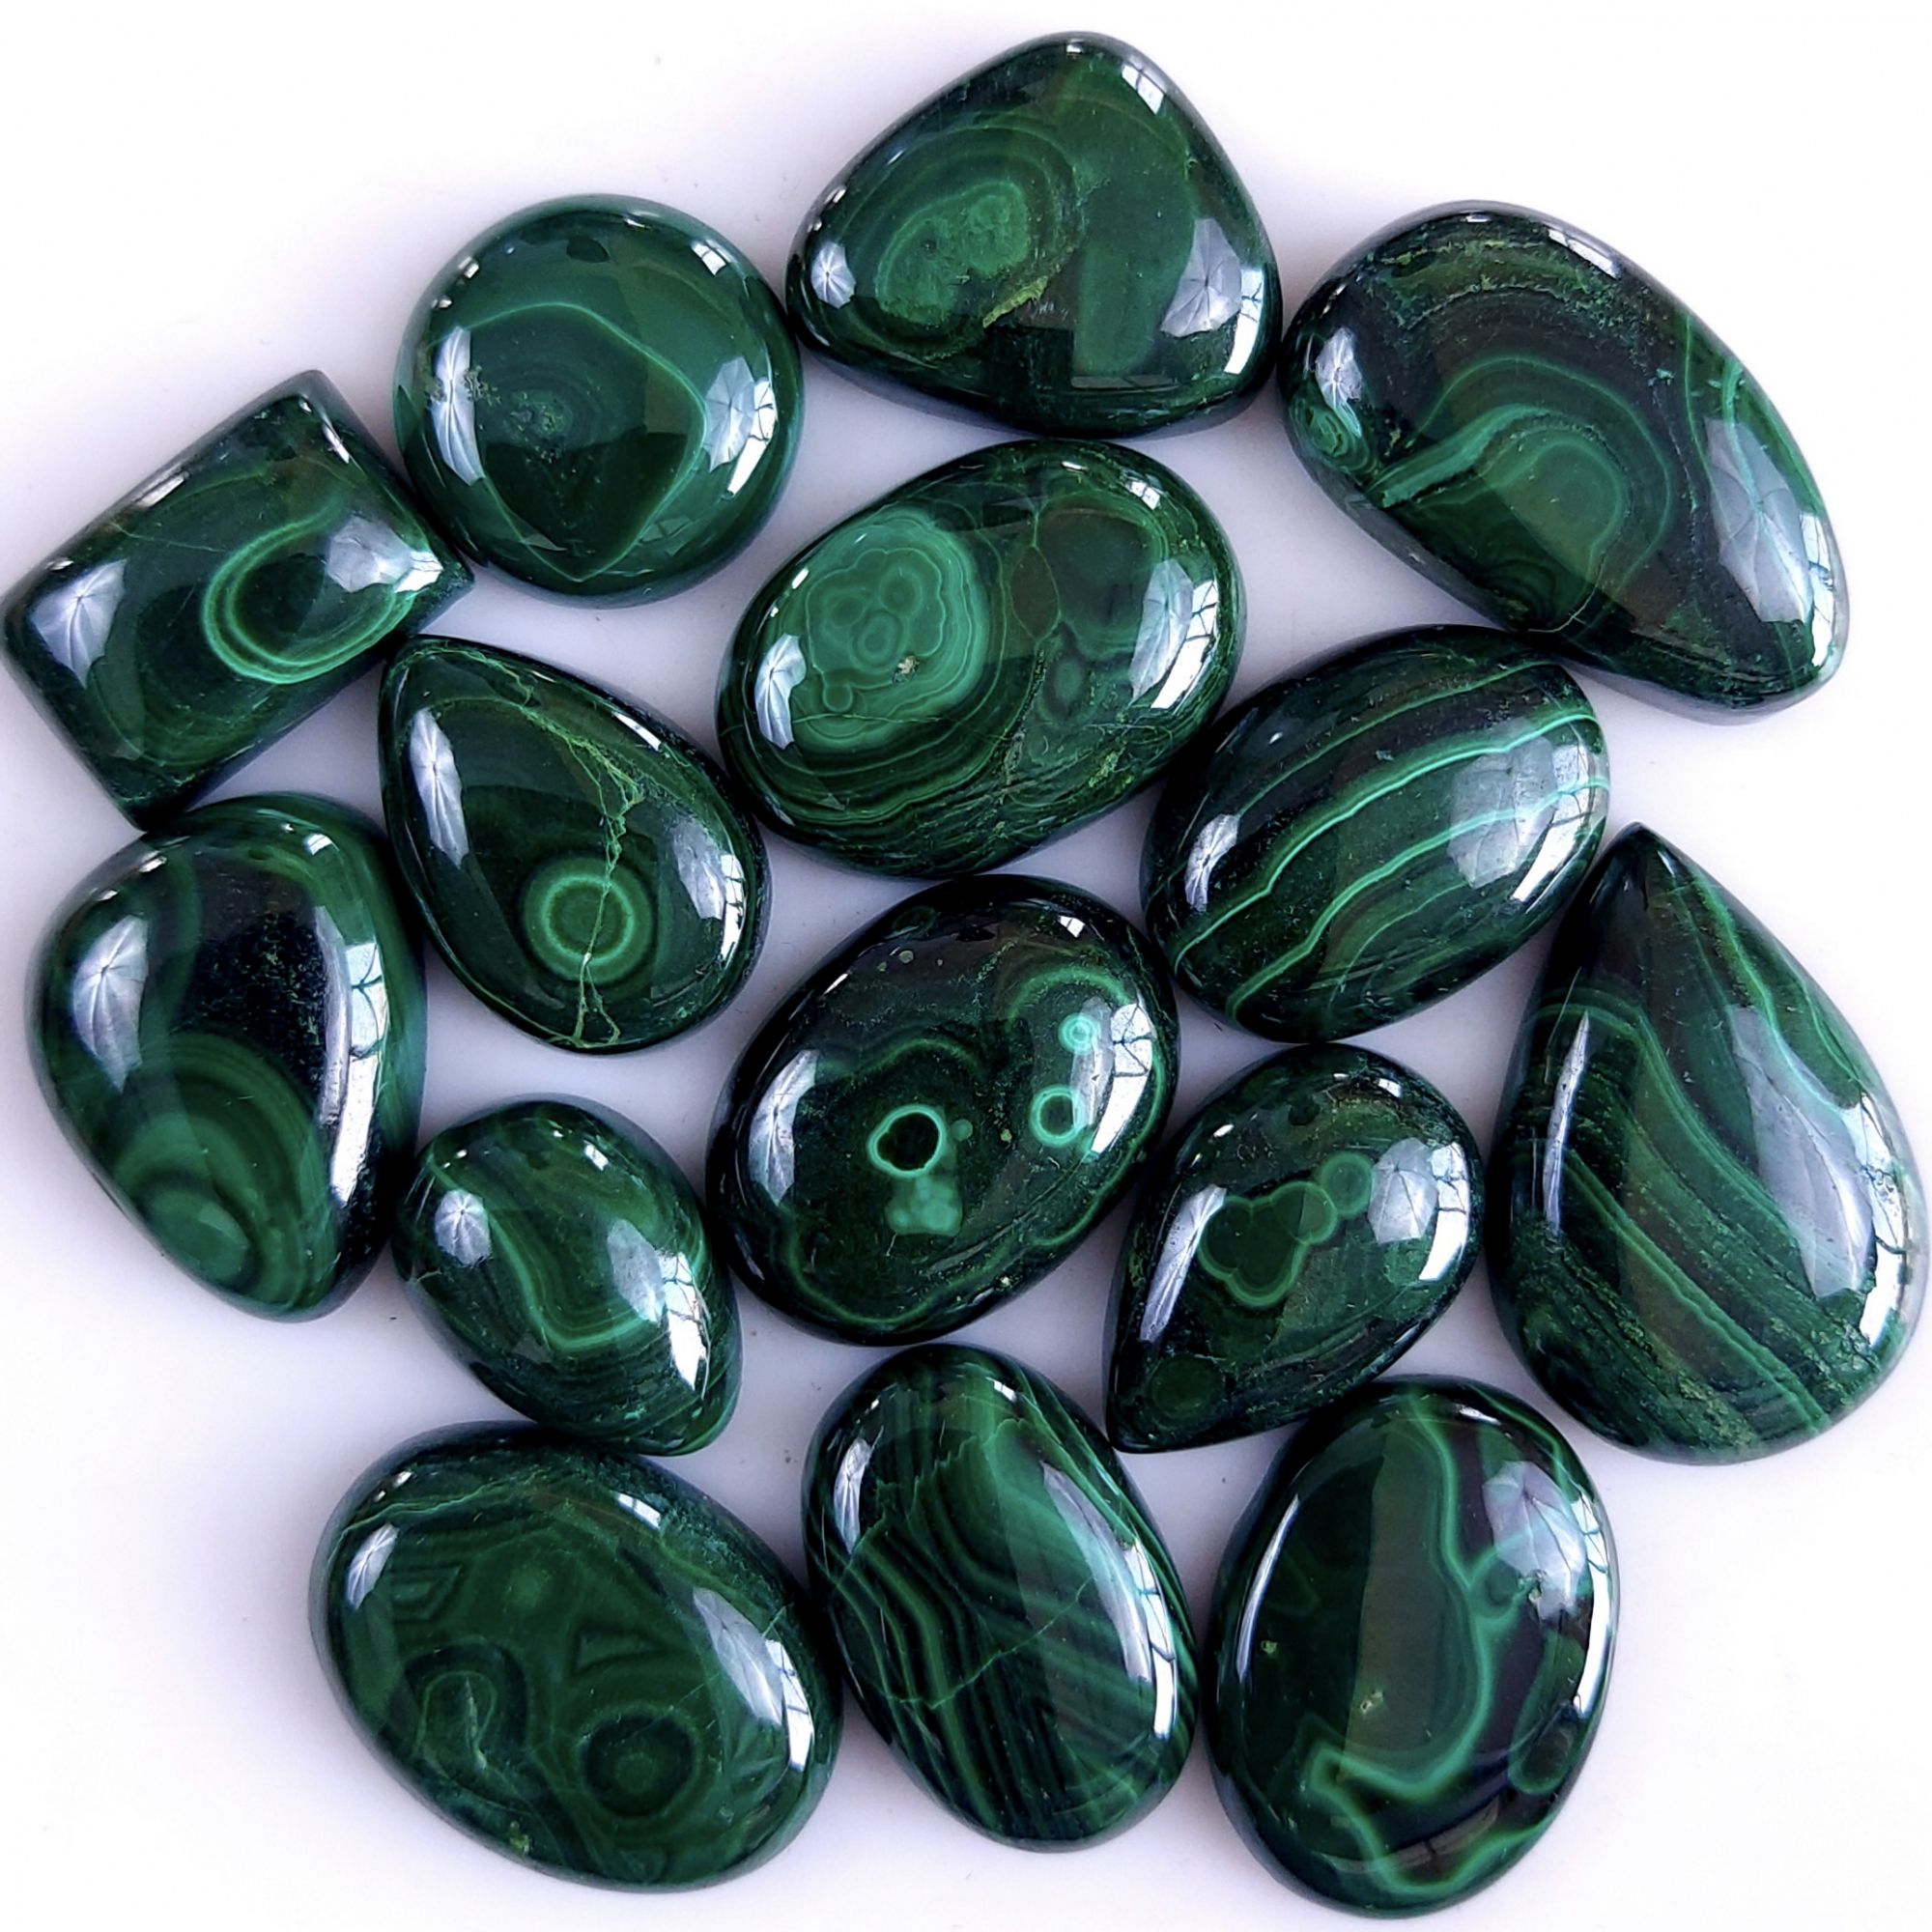 15Pcs 315Cts Natural Green Malachite Flat Back Loose Cabochon Gemstone For Handmade Jewelry Making and Craft Supplies 23x12 13x9mm#9340